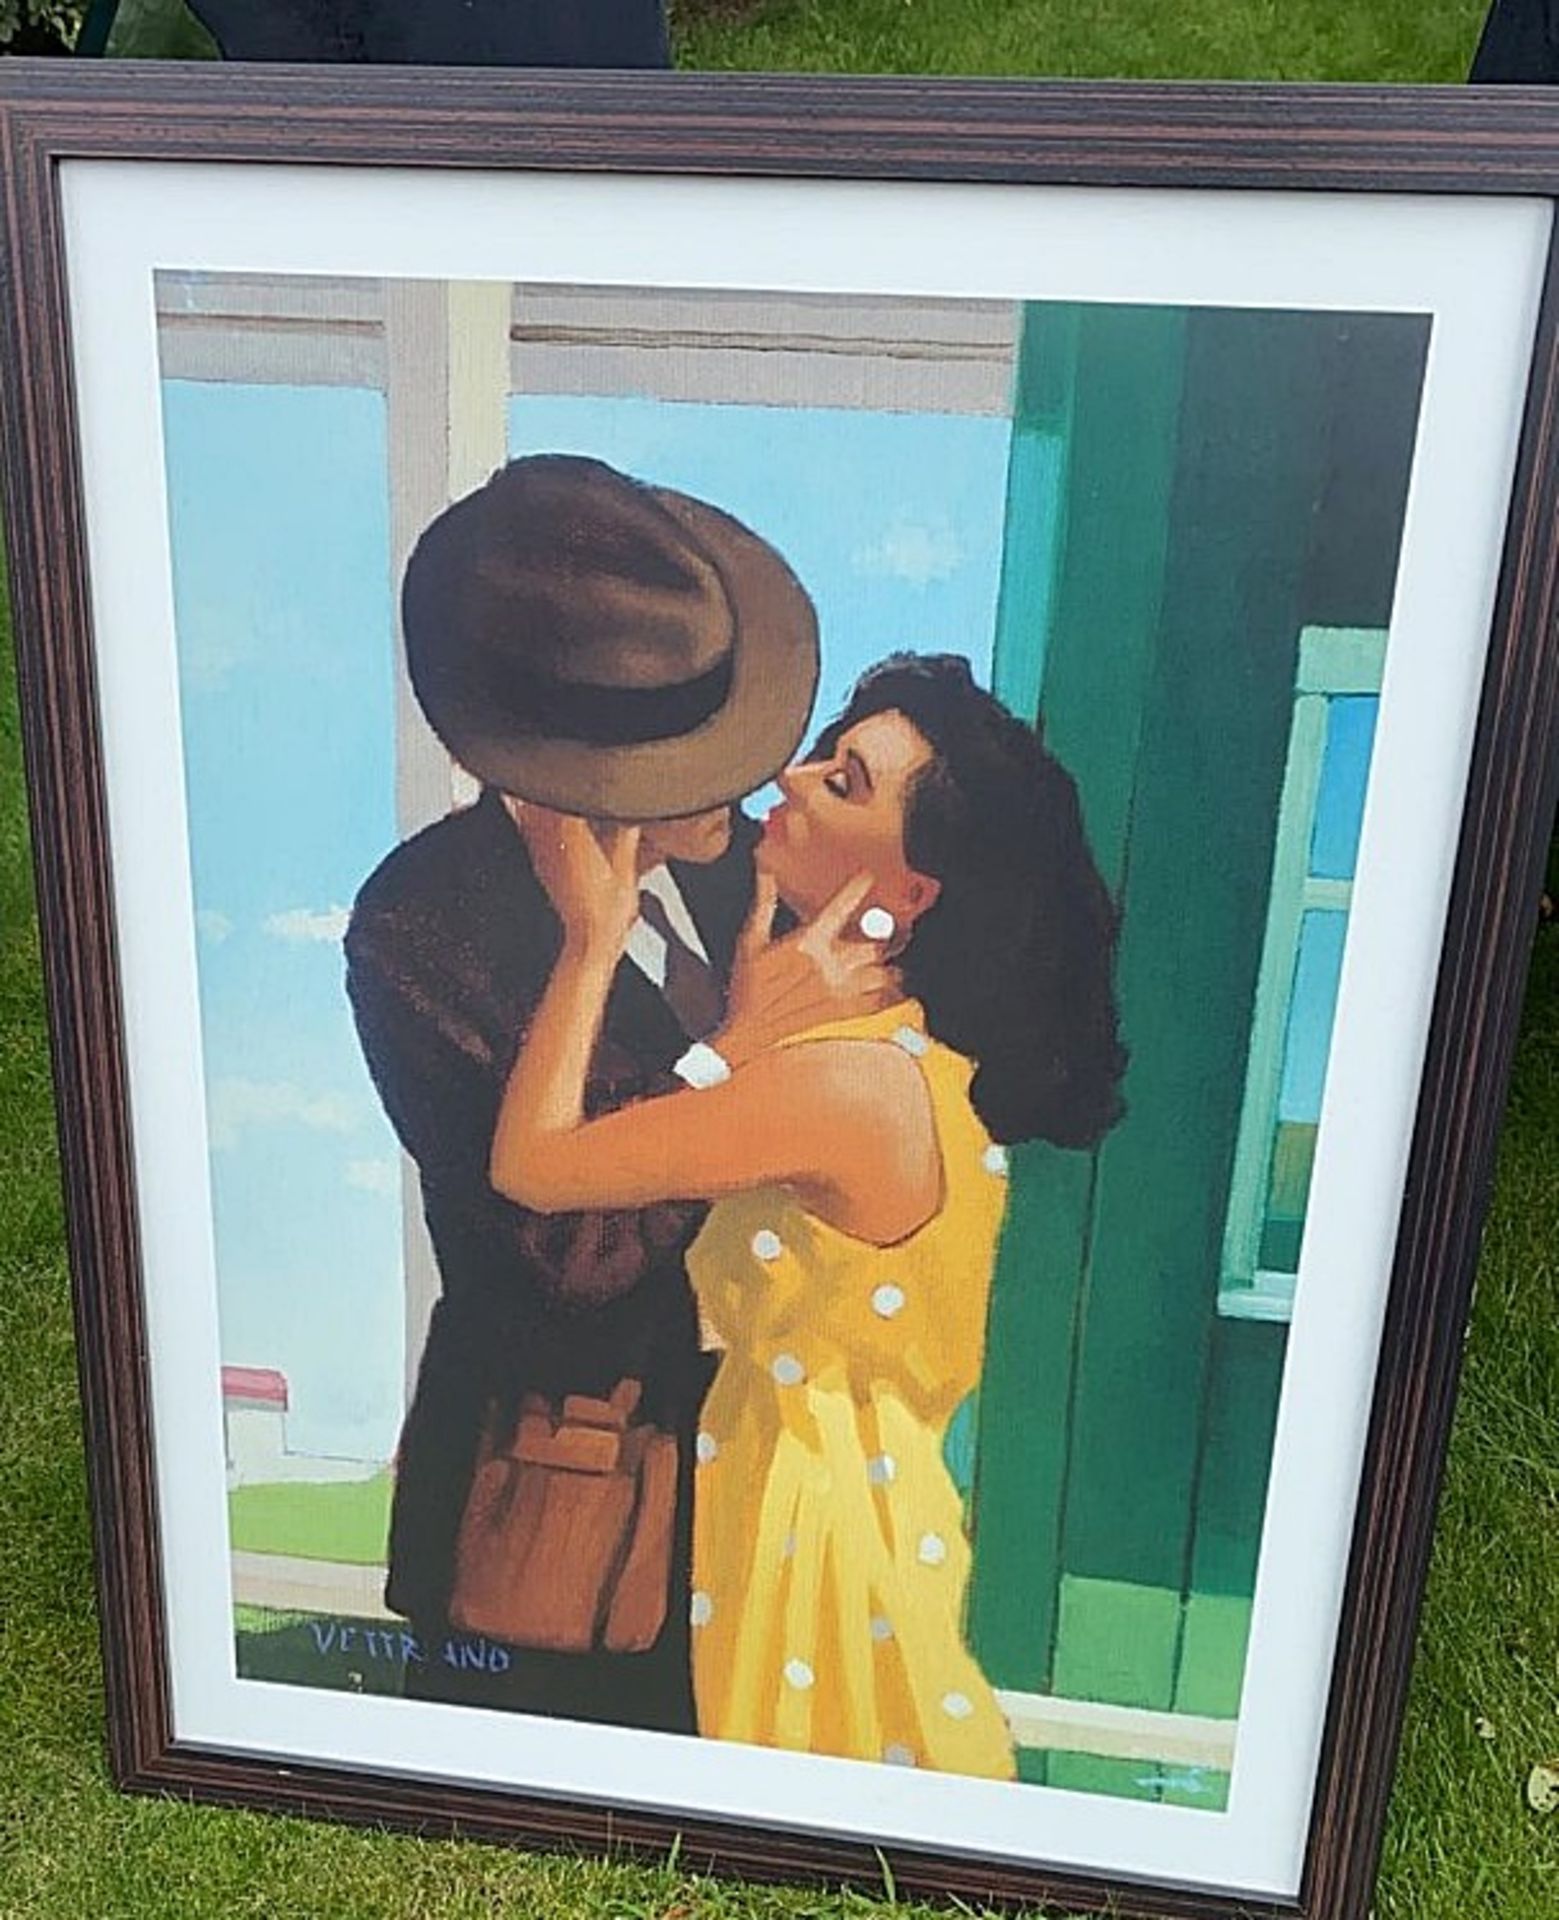 1 x Framed Art Print On Canvas 'Limited Edition' By Jack Vettriano - Frame Dimensions: 78 x 100cm